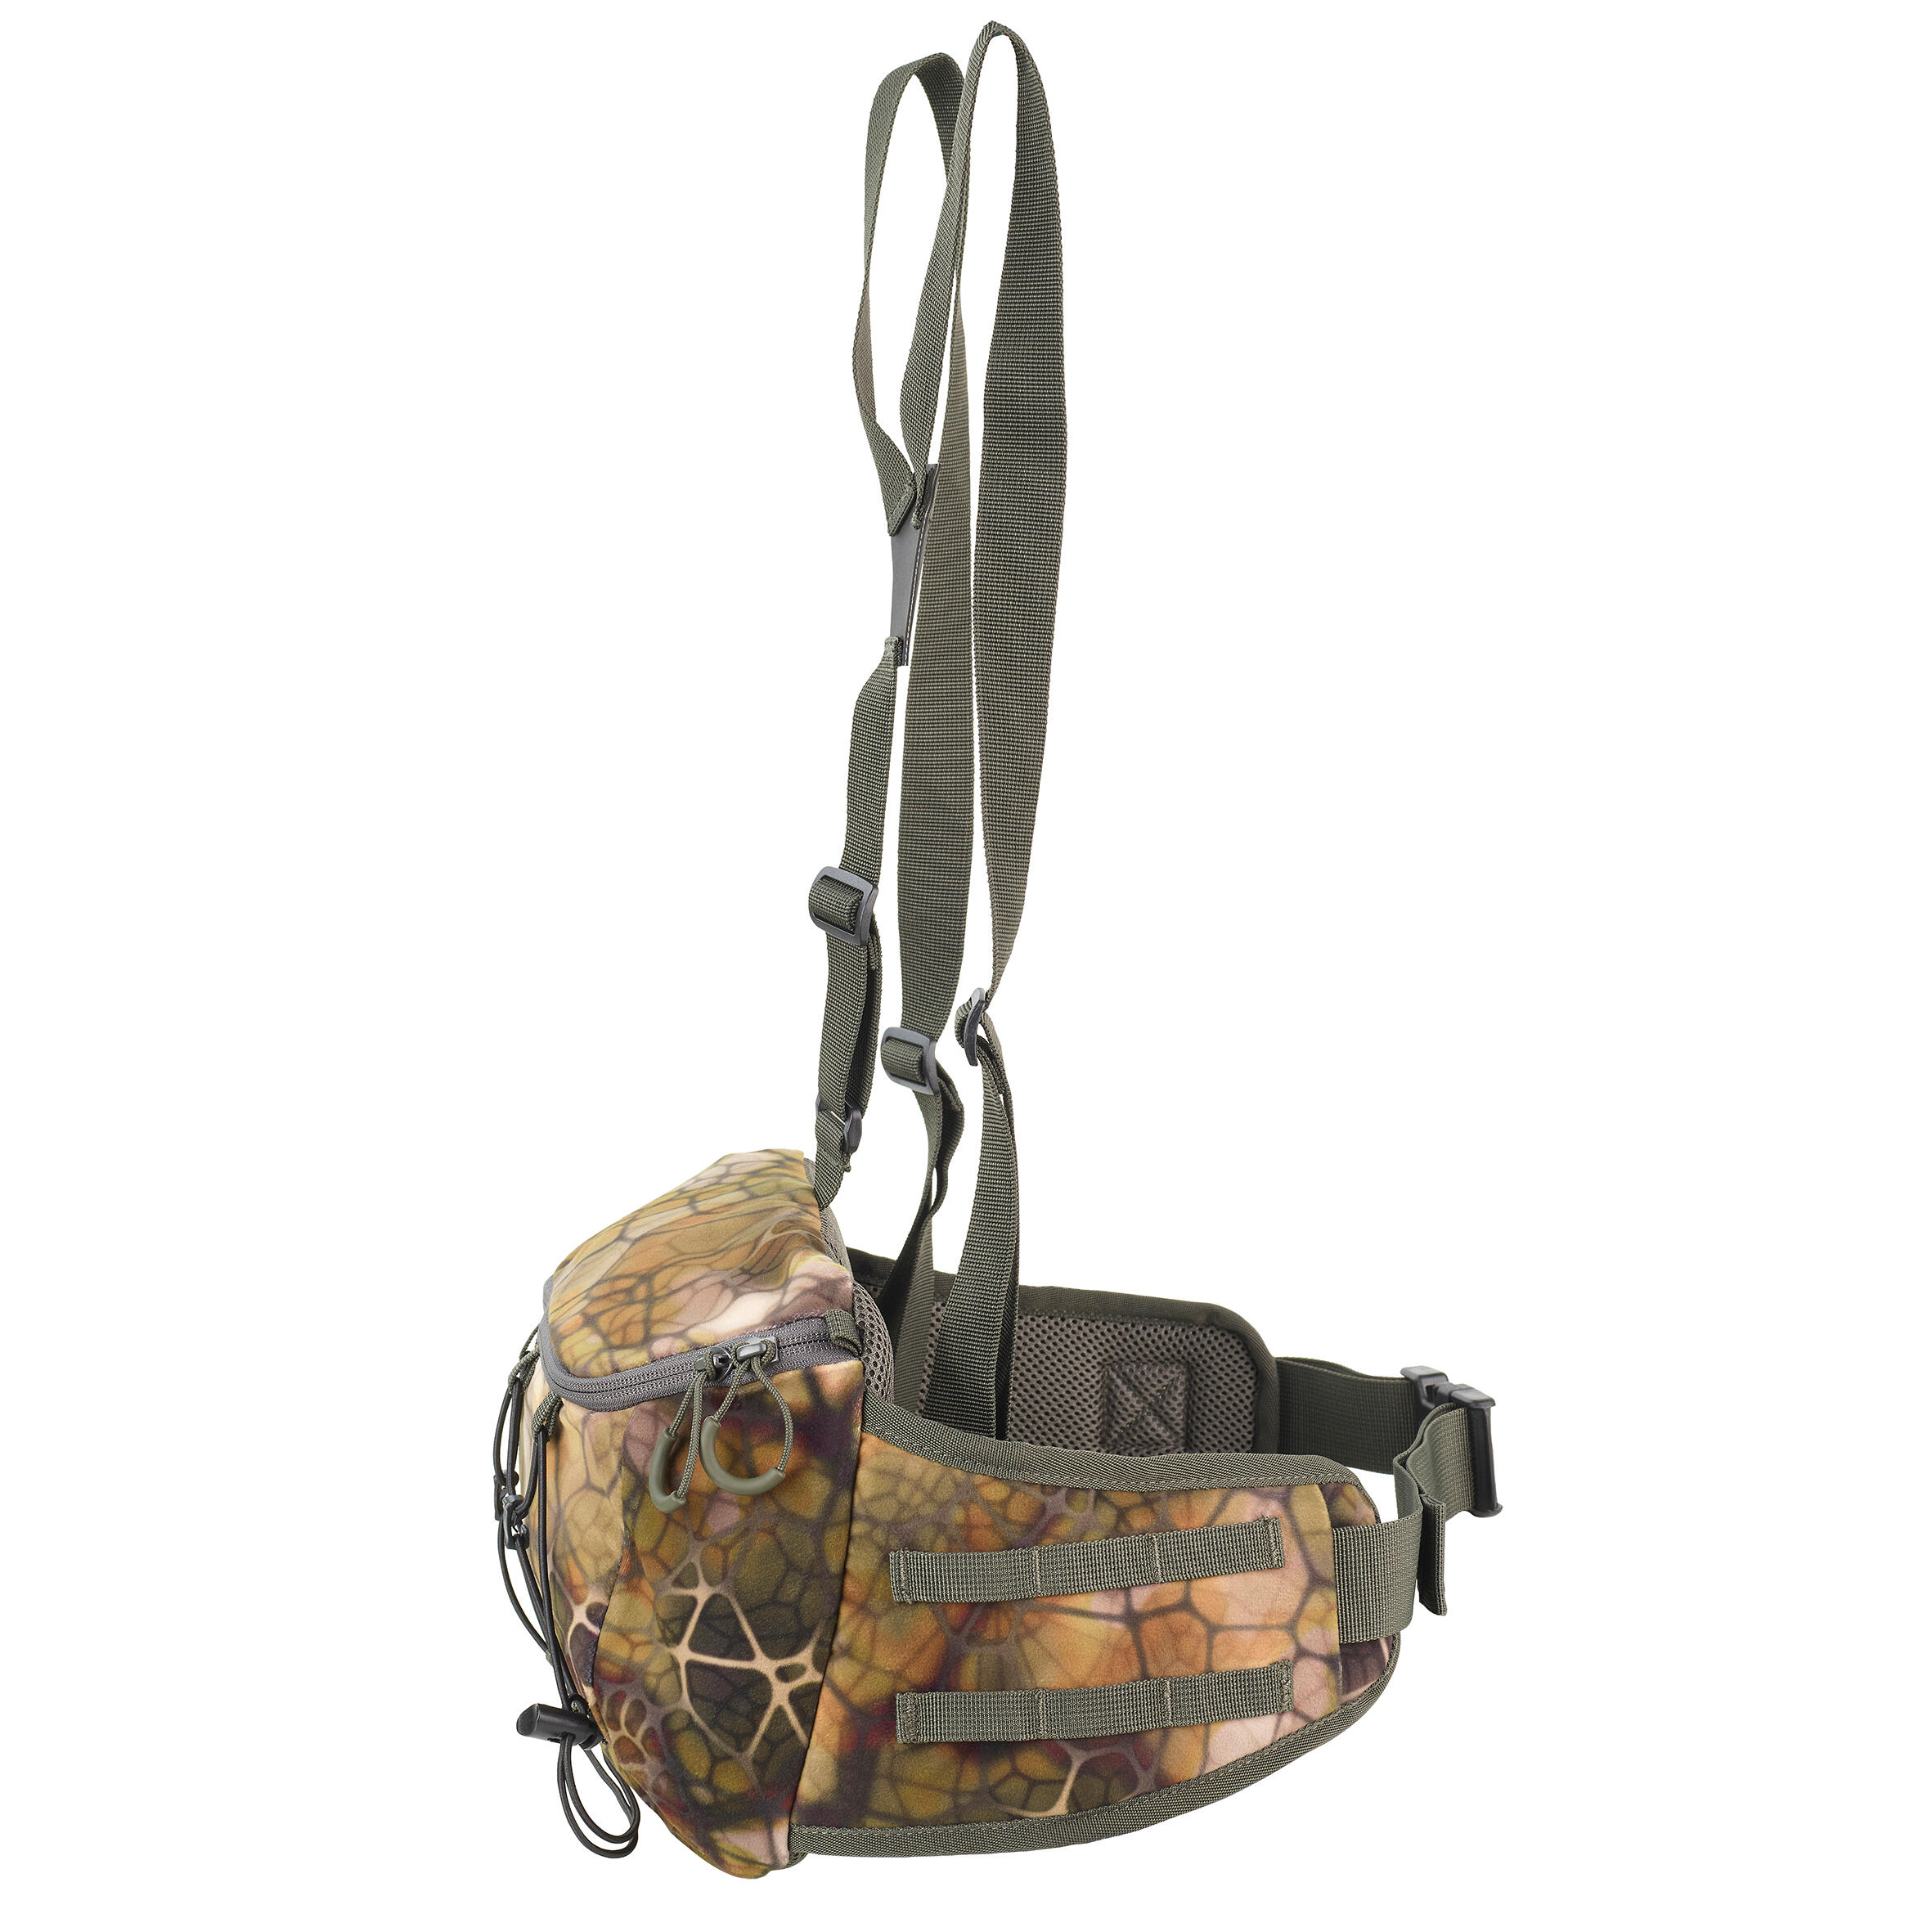 Northwest Territory Camouflage Fanny Pack Waist Pack Hunting